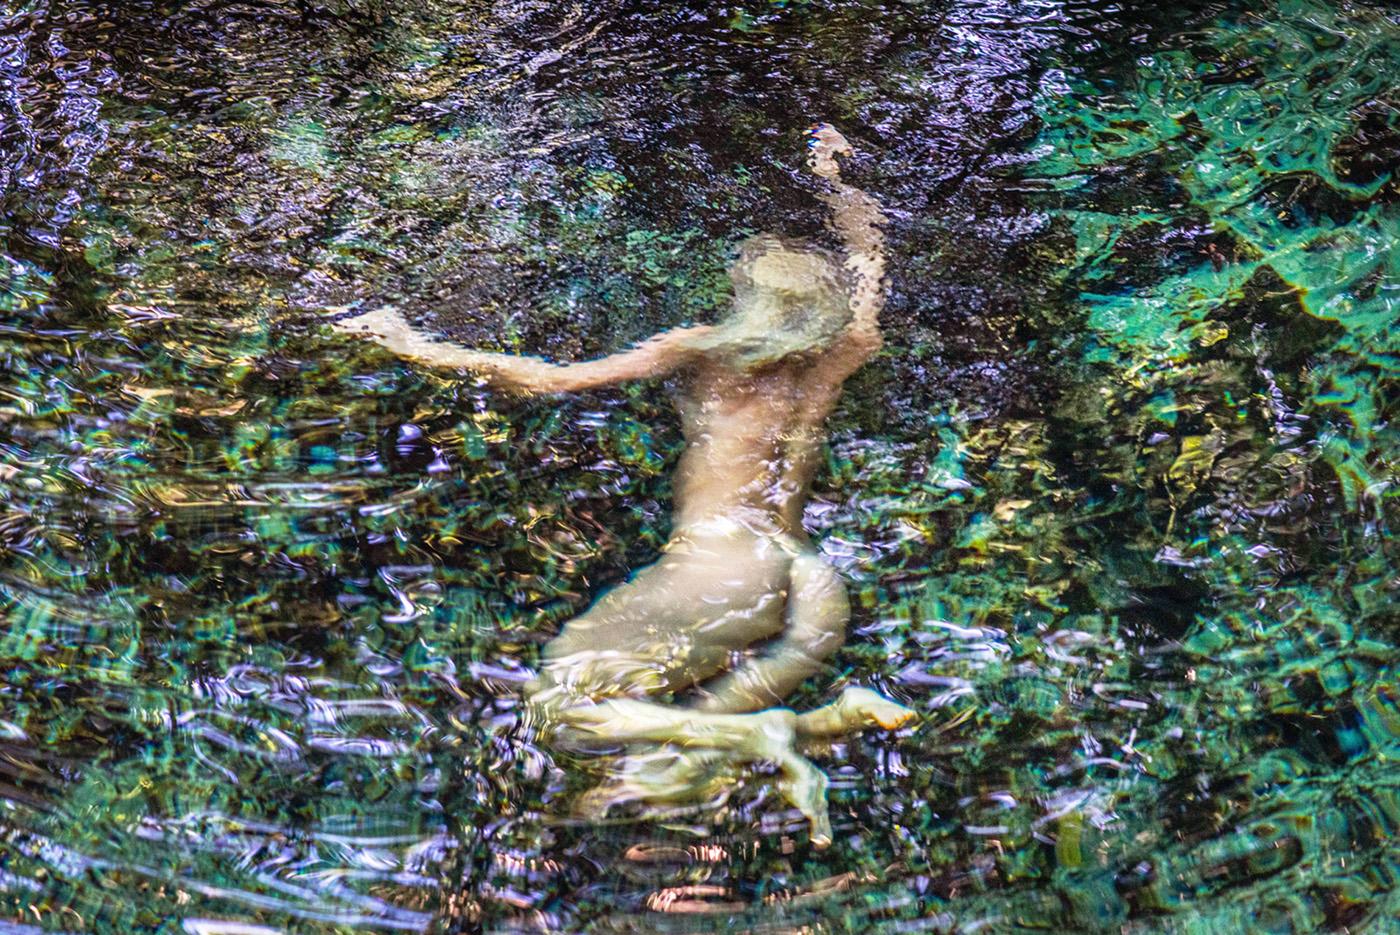 John Mazlish Nude Photograph - "Suspended"- Colorful Nude in Water Photo